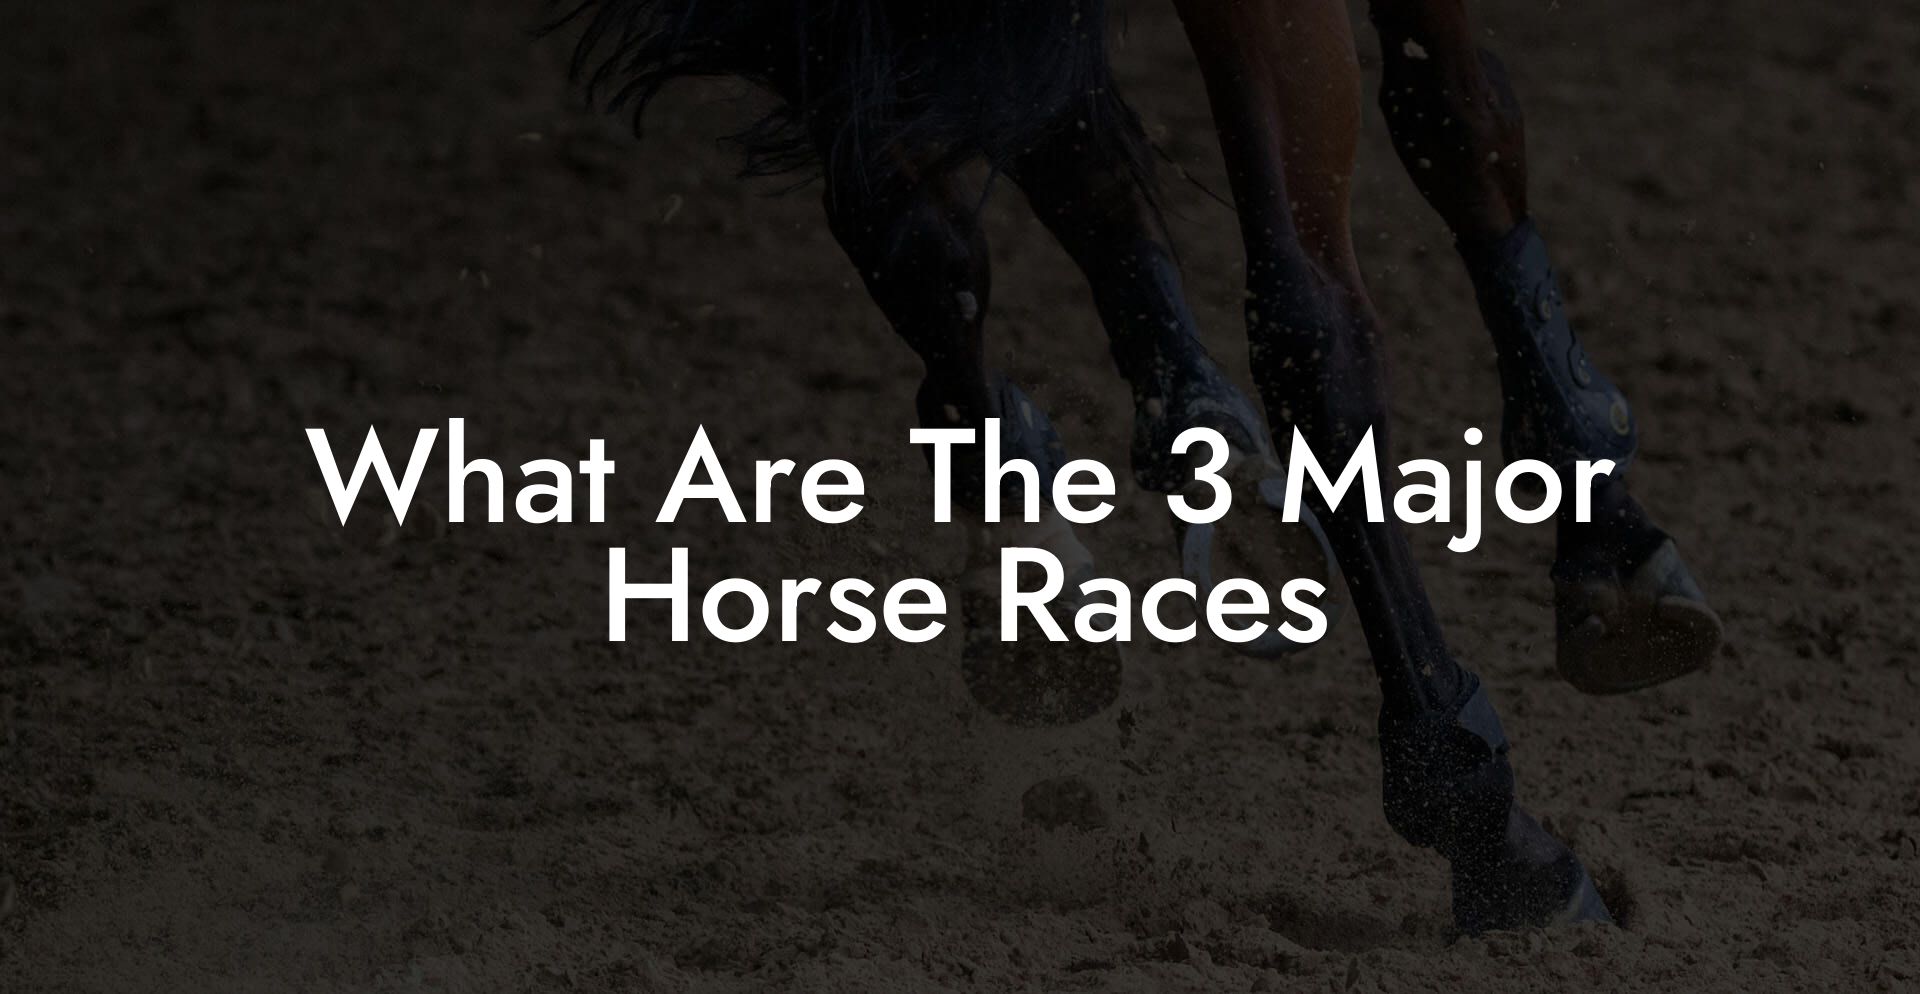 What Are The 3 Major Horse Races